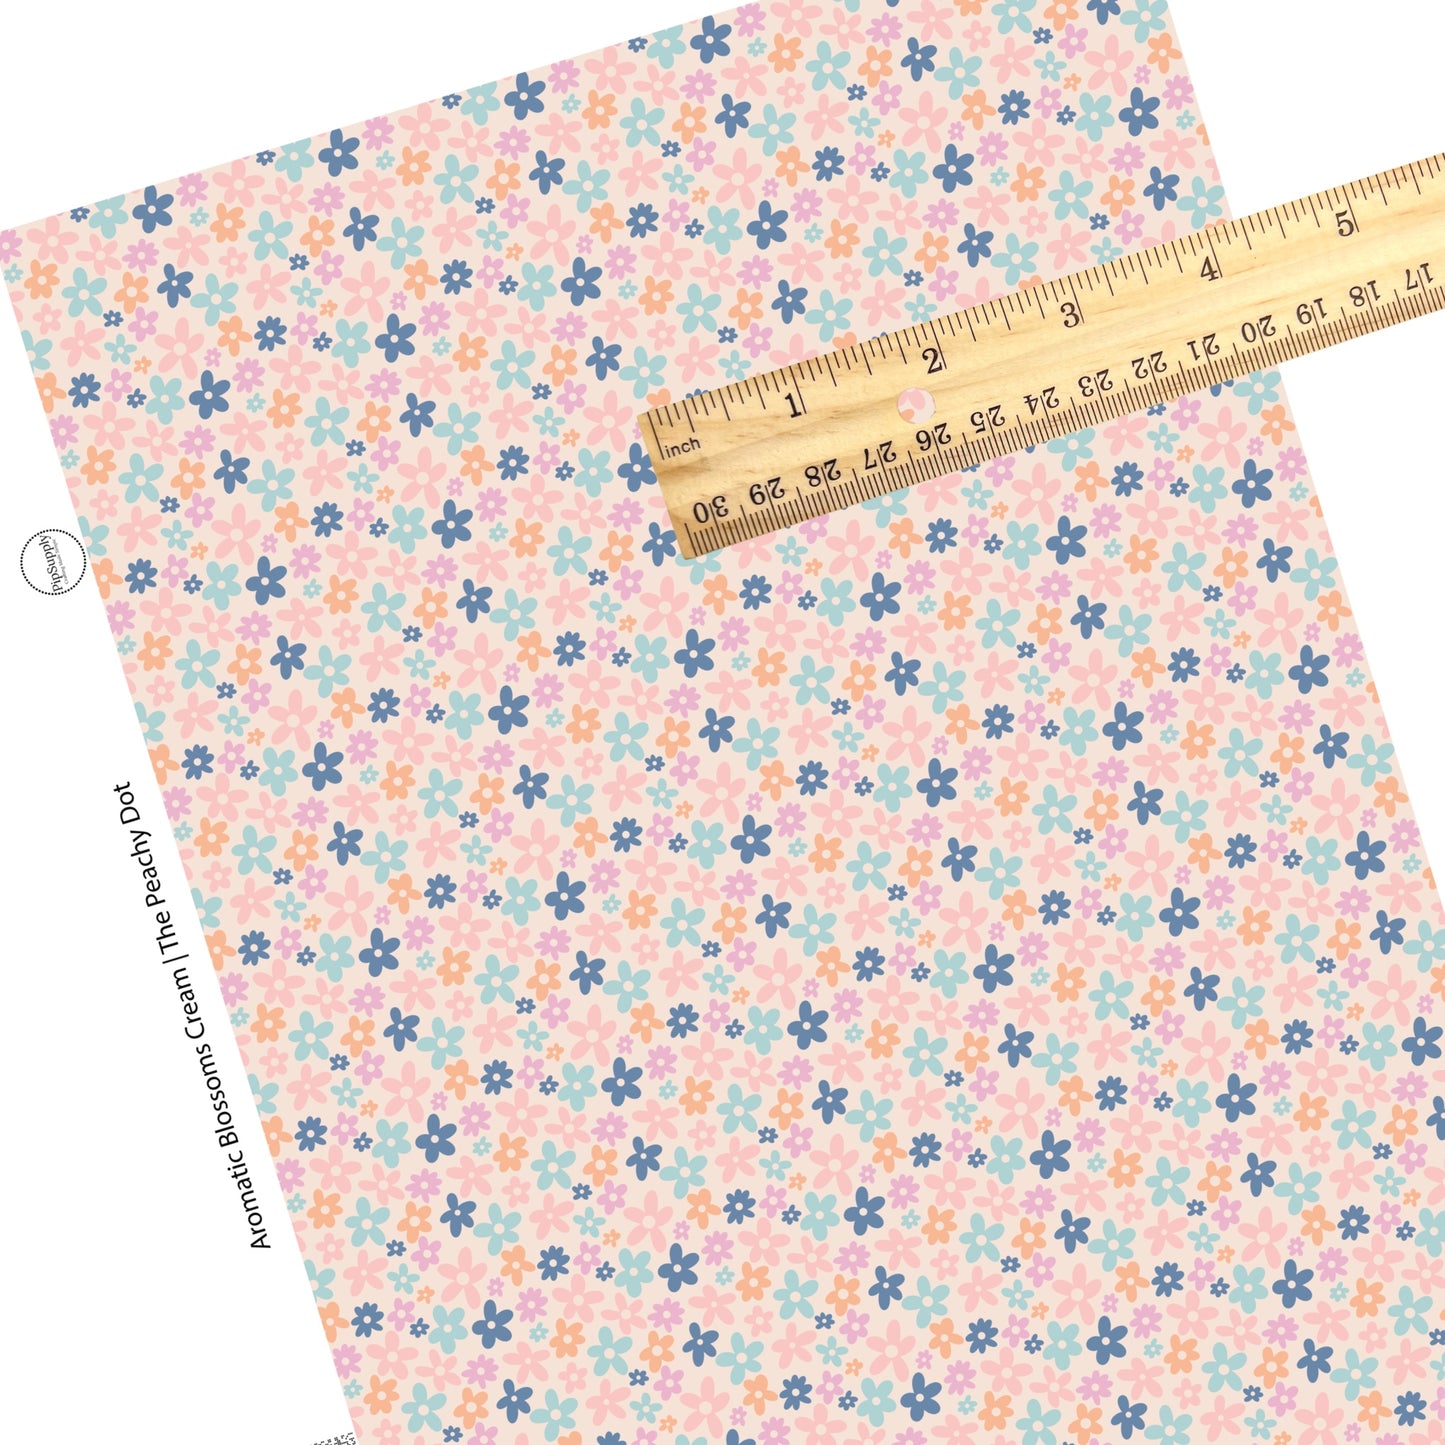 These spring floral pattern themed faux leather sheets contain the following design elements: pink, orange, and blue flowers on cream. Our CPSIA compliant faux leather sheets or rolls can be used for all types of crafting projects.